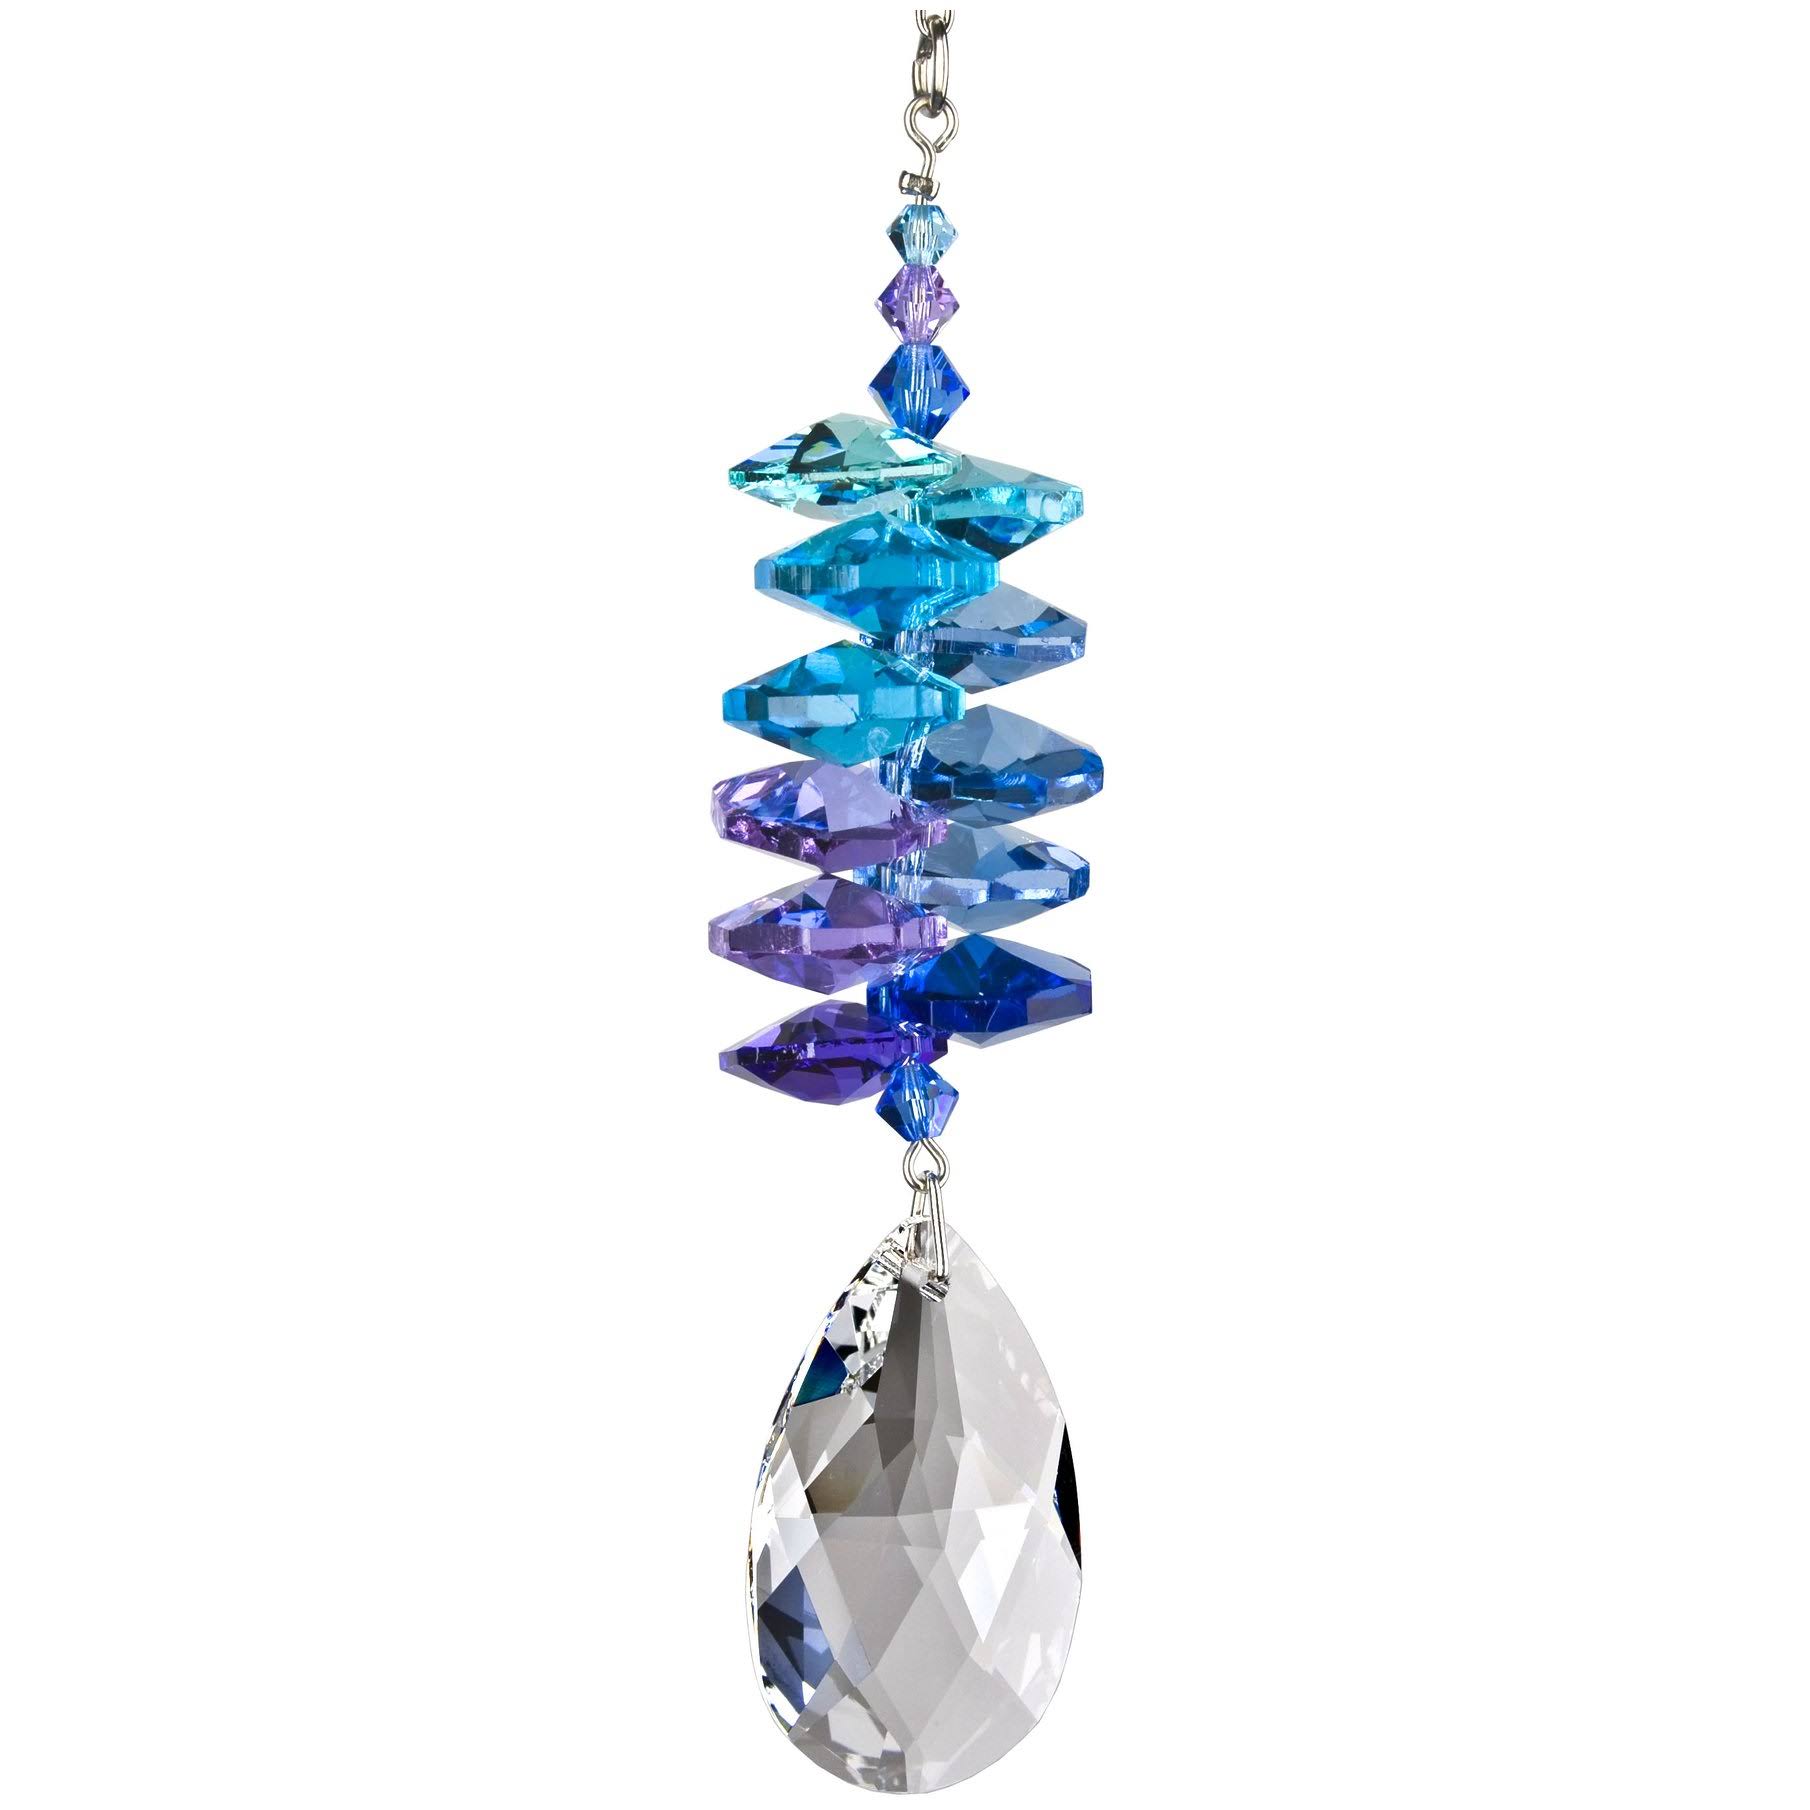 Woodstock Chimes Moonlight Cascade Almond Crystal Wind Chime